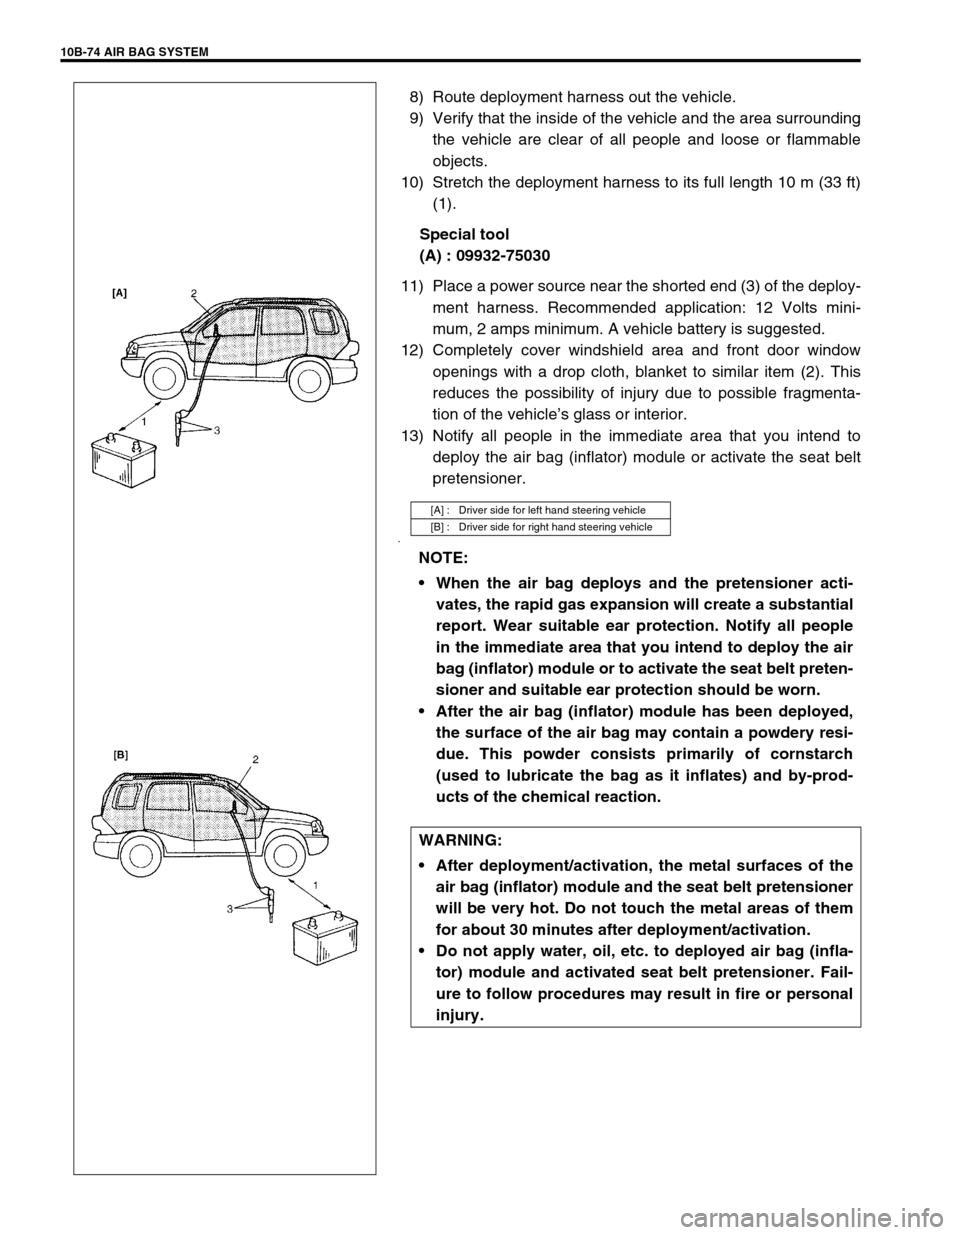 SUZUKI GRAND VITARA 1999 2.G Owners Manual 10B-74 AIR BAG SYSTEM
8) Route deployment harness out the vehicle. 
9) Verify that the inside of the vehicle and the area surrounding
the vehicle are clear of all people and loose or flammable
objects